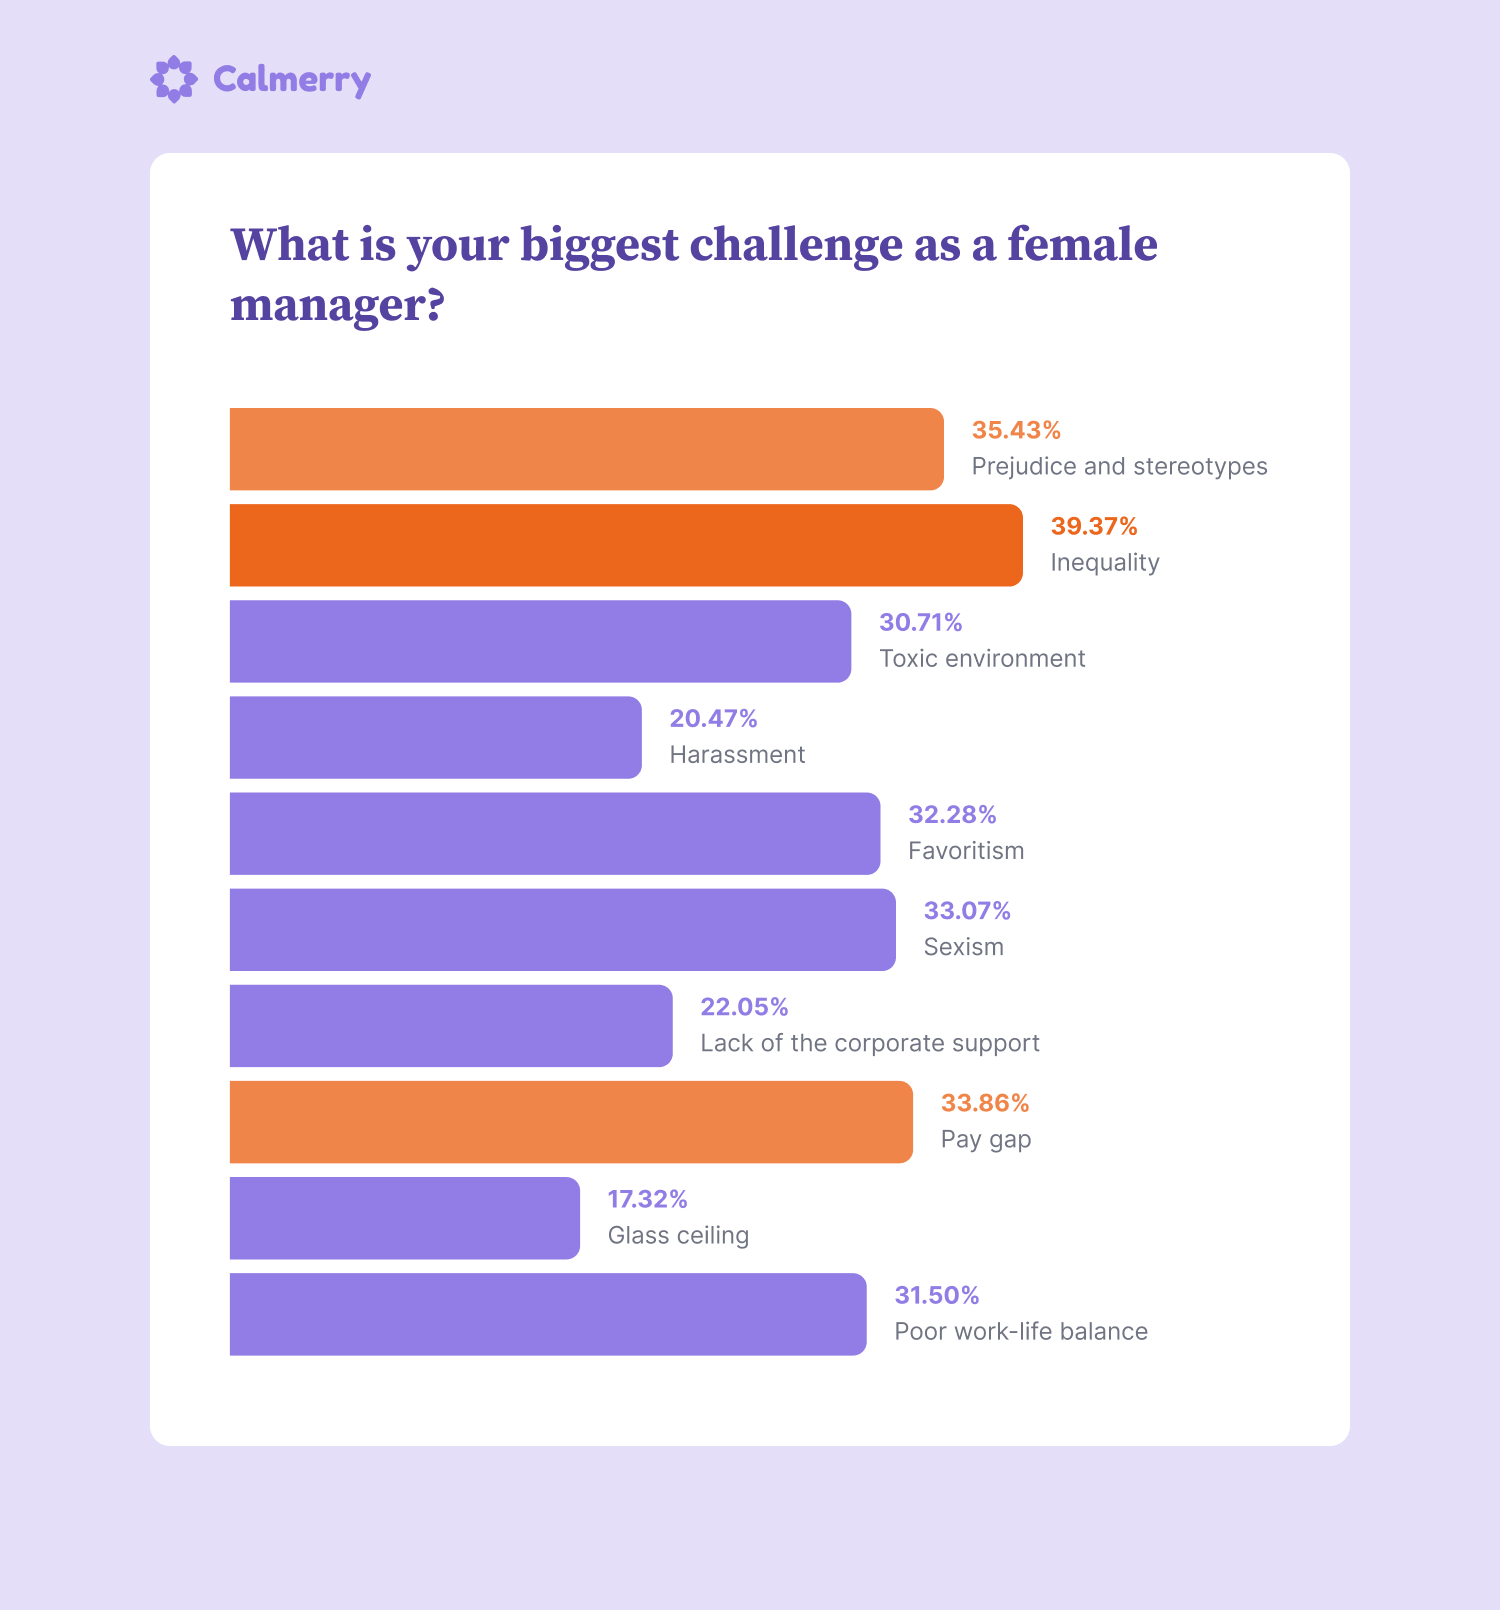 What is your biggest challenge as a female manager? Prejudice and stereotypes 45 35.43% Inequality 50 39.37% Toxic environment 39 30.71% Harassment 26 20.47% Favoritism 41 32.28% Sexism 42 33.07% Lack of the corporate support 28 22.05% Pay gap 43 33.86% Glass ceiling 22 17.32% Poor work-life balance 40 31.50%